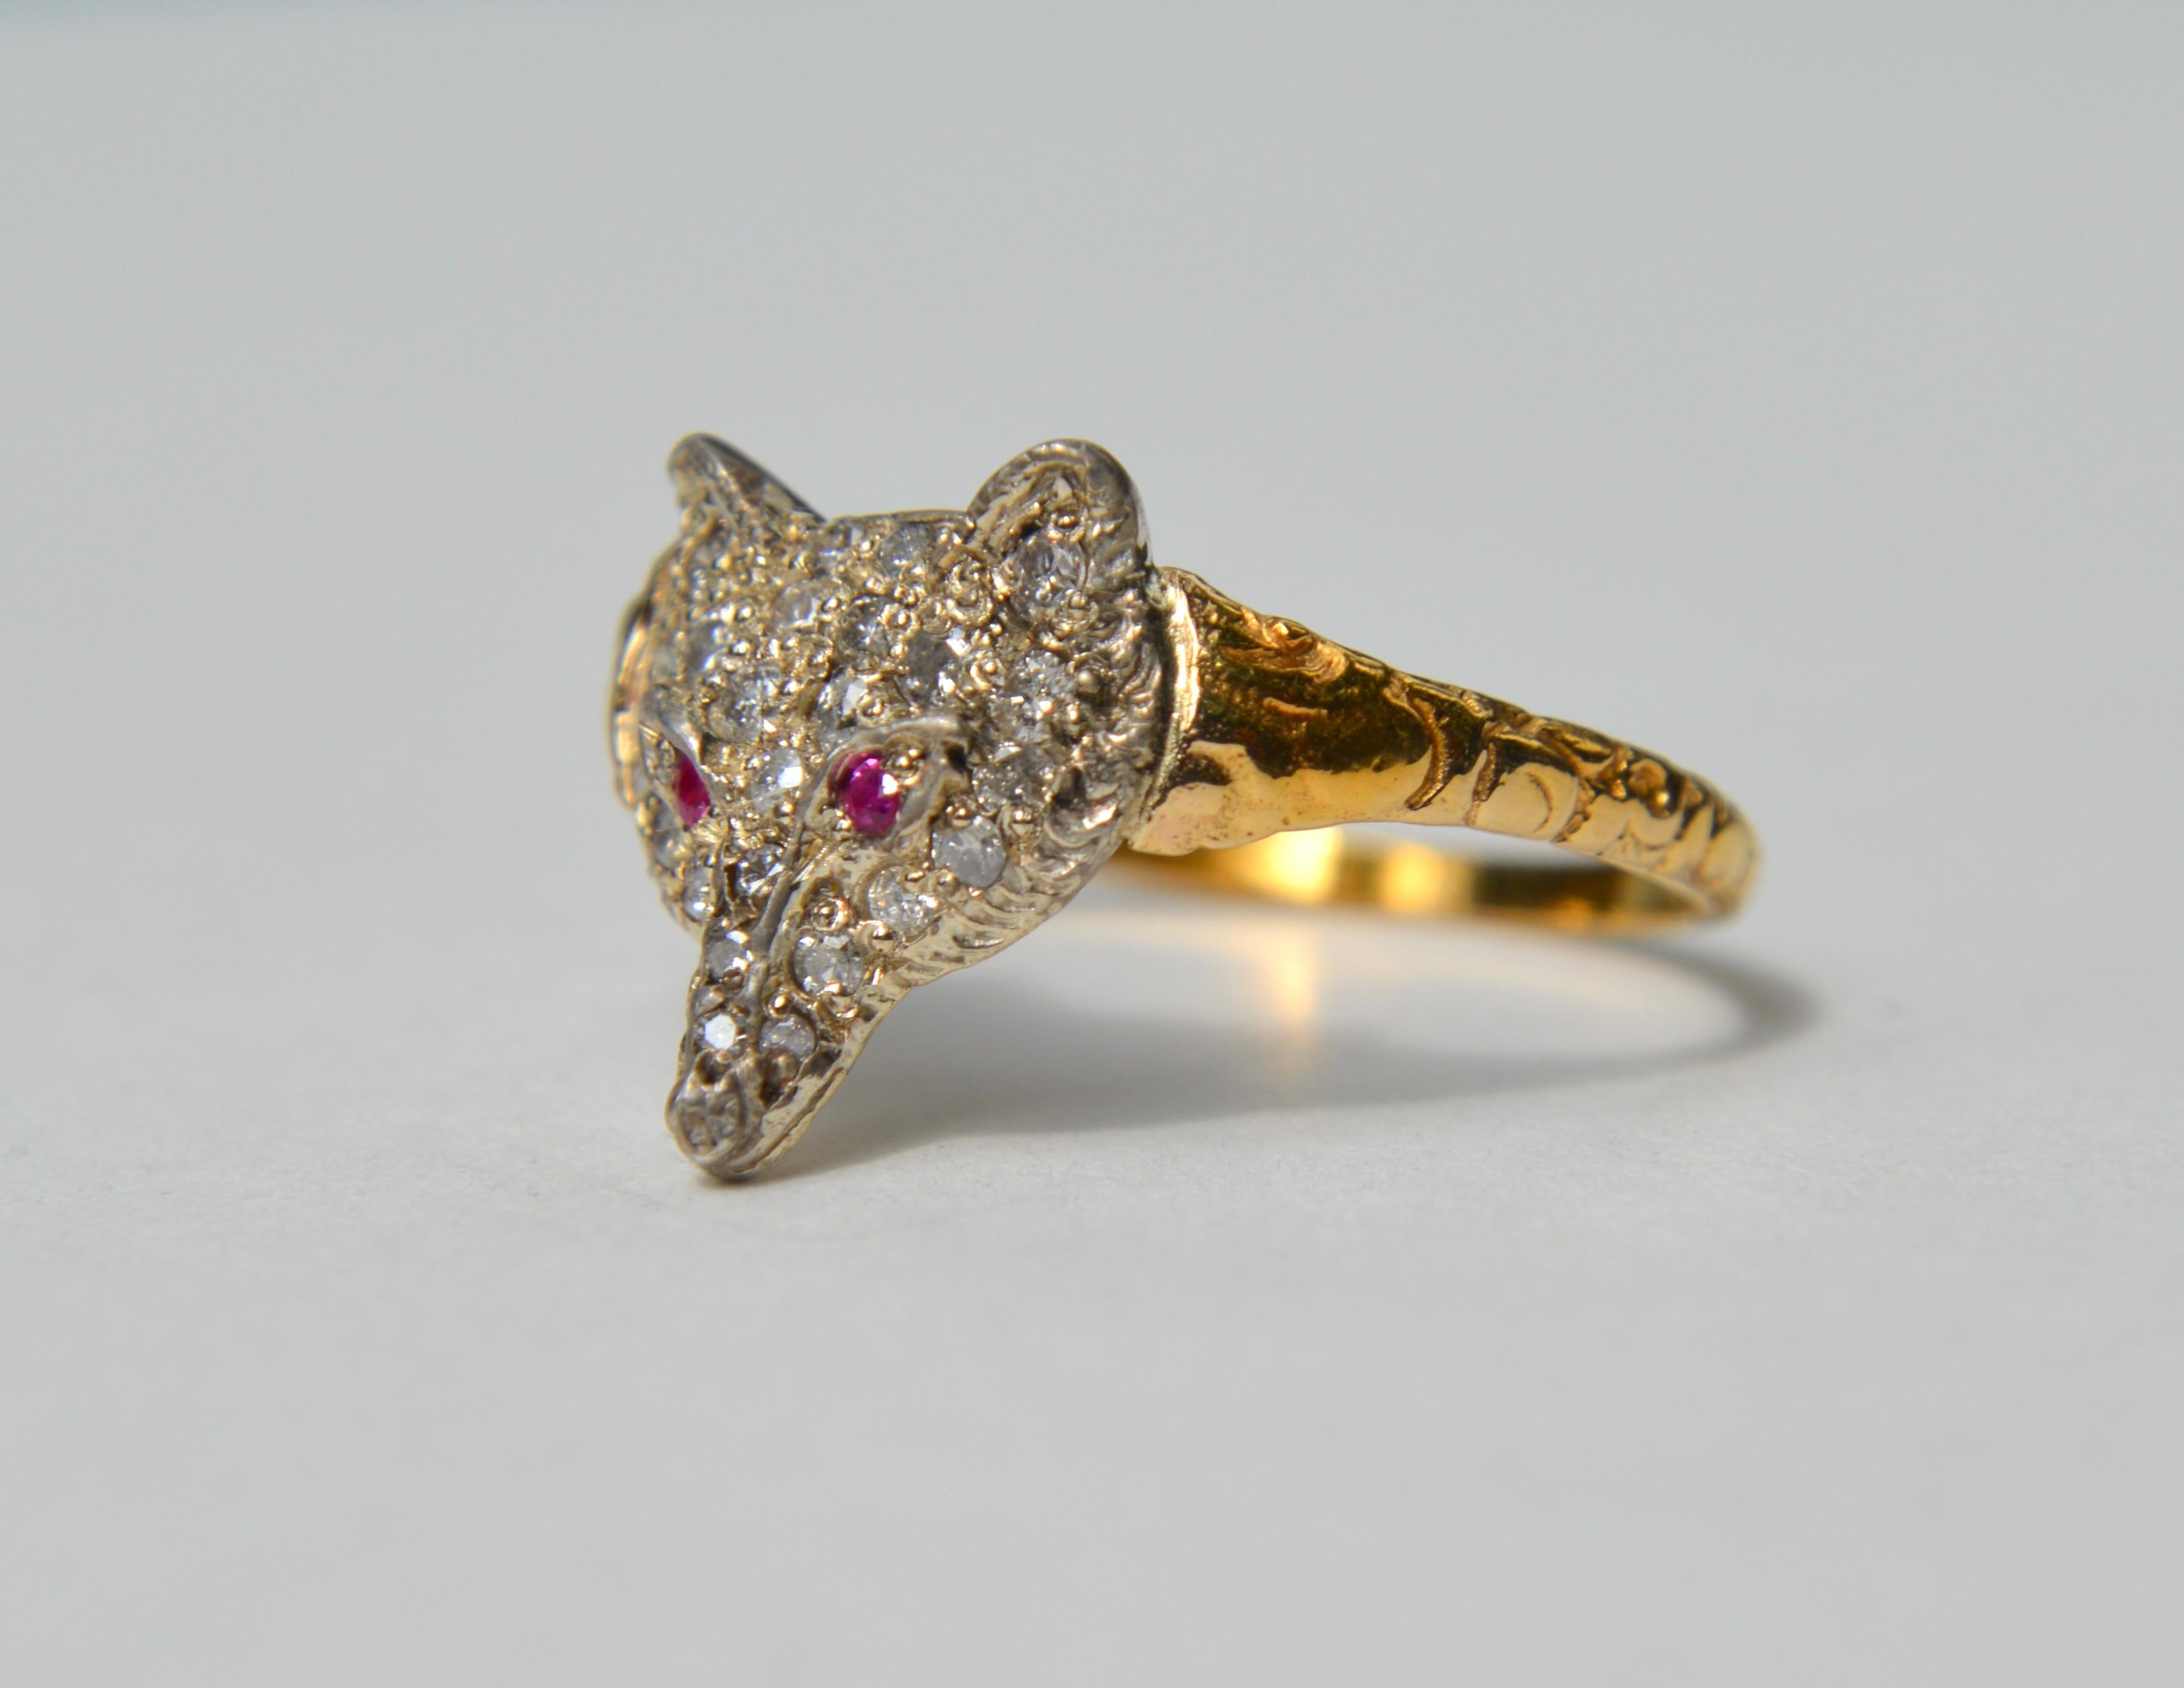 Gorgeous English origin Edwardian era early 1900s 18K yellow gold with sparkling round cut diamonds and natural ruby fox ring. Size 8.5, can be resized. Ring is marked and tested as solid 18K gold. Face of fox measures 13 x 14mm, and is also 18K